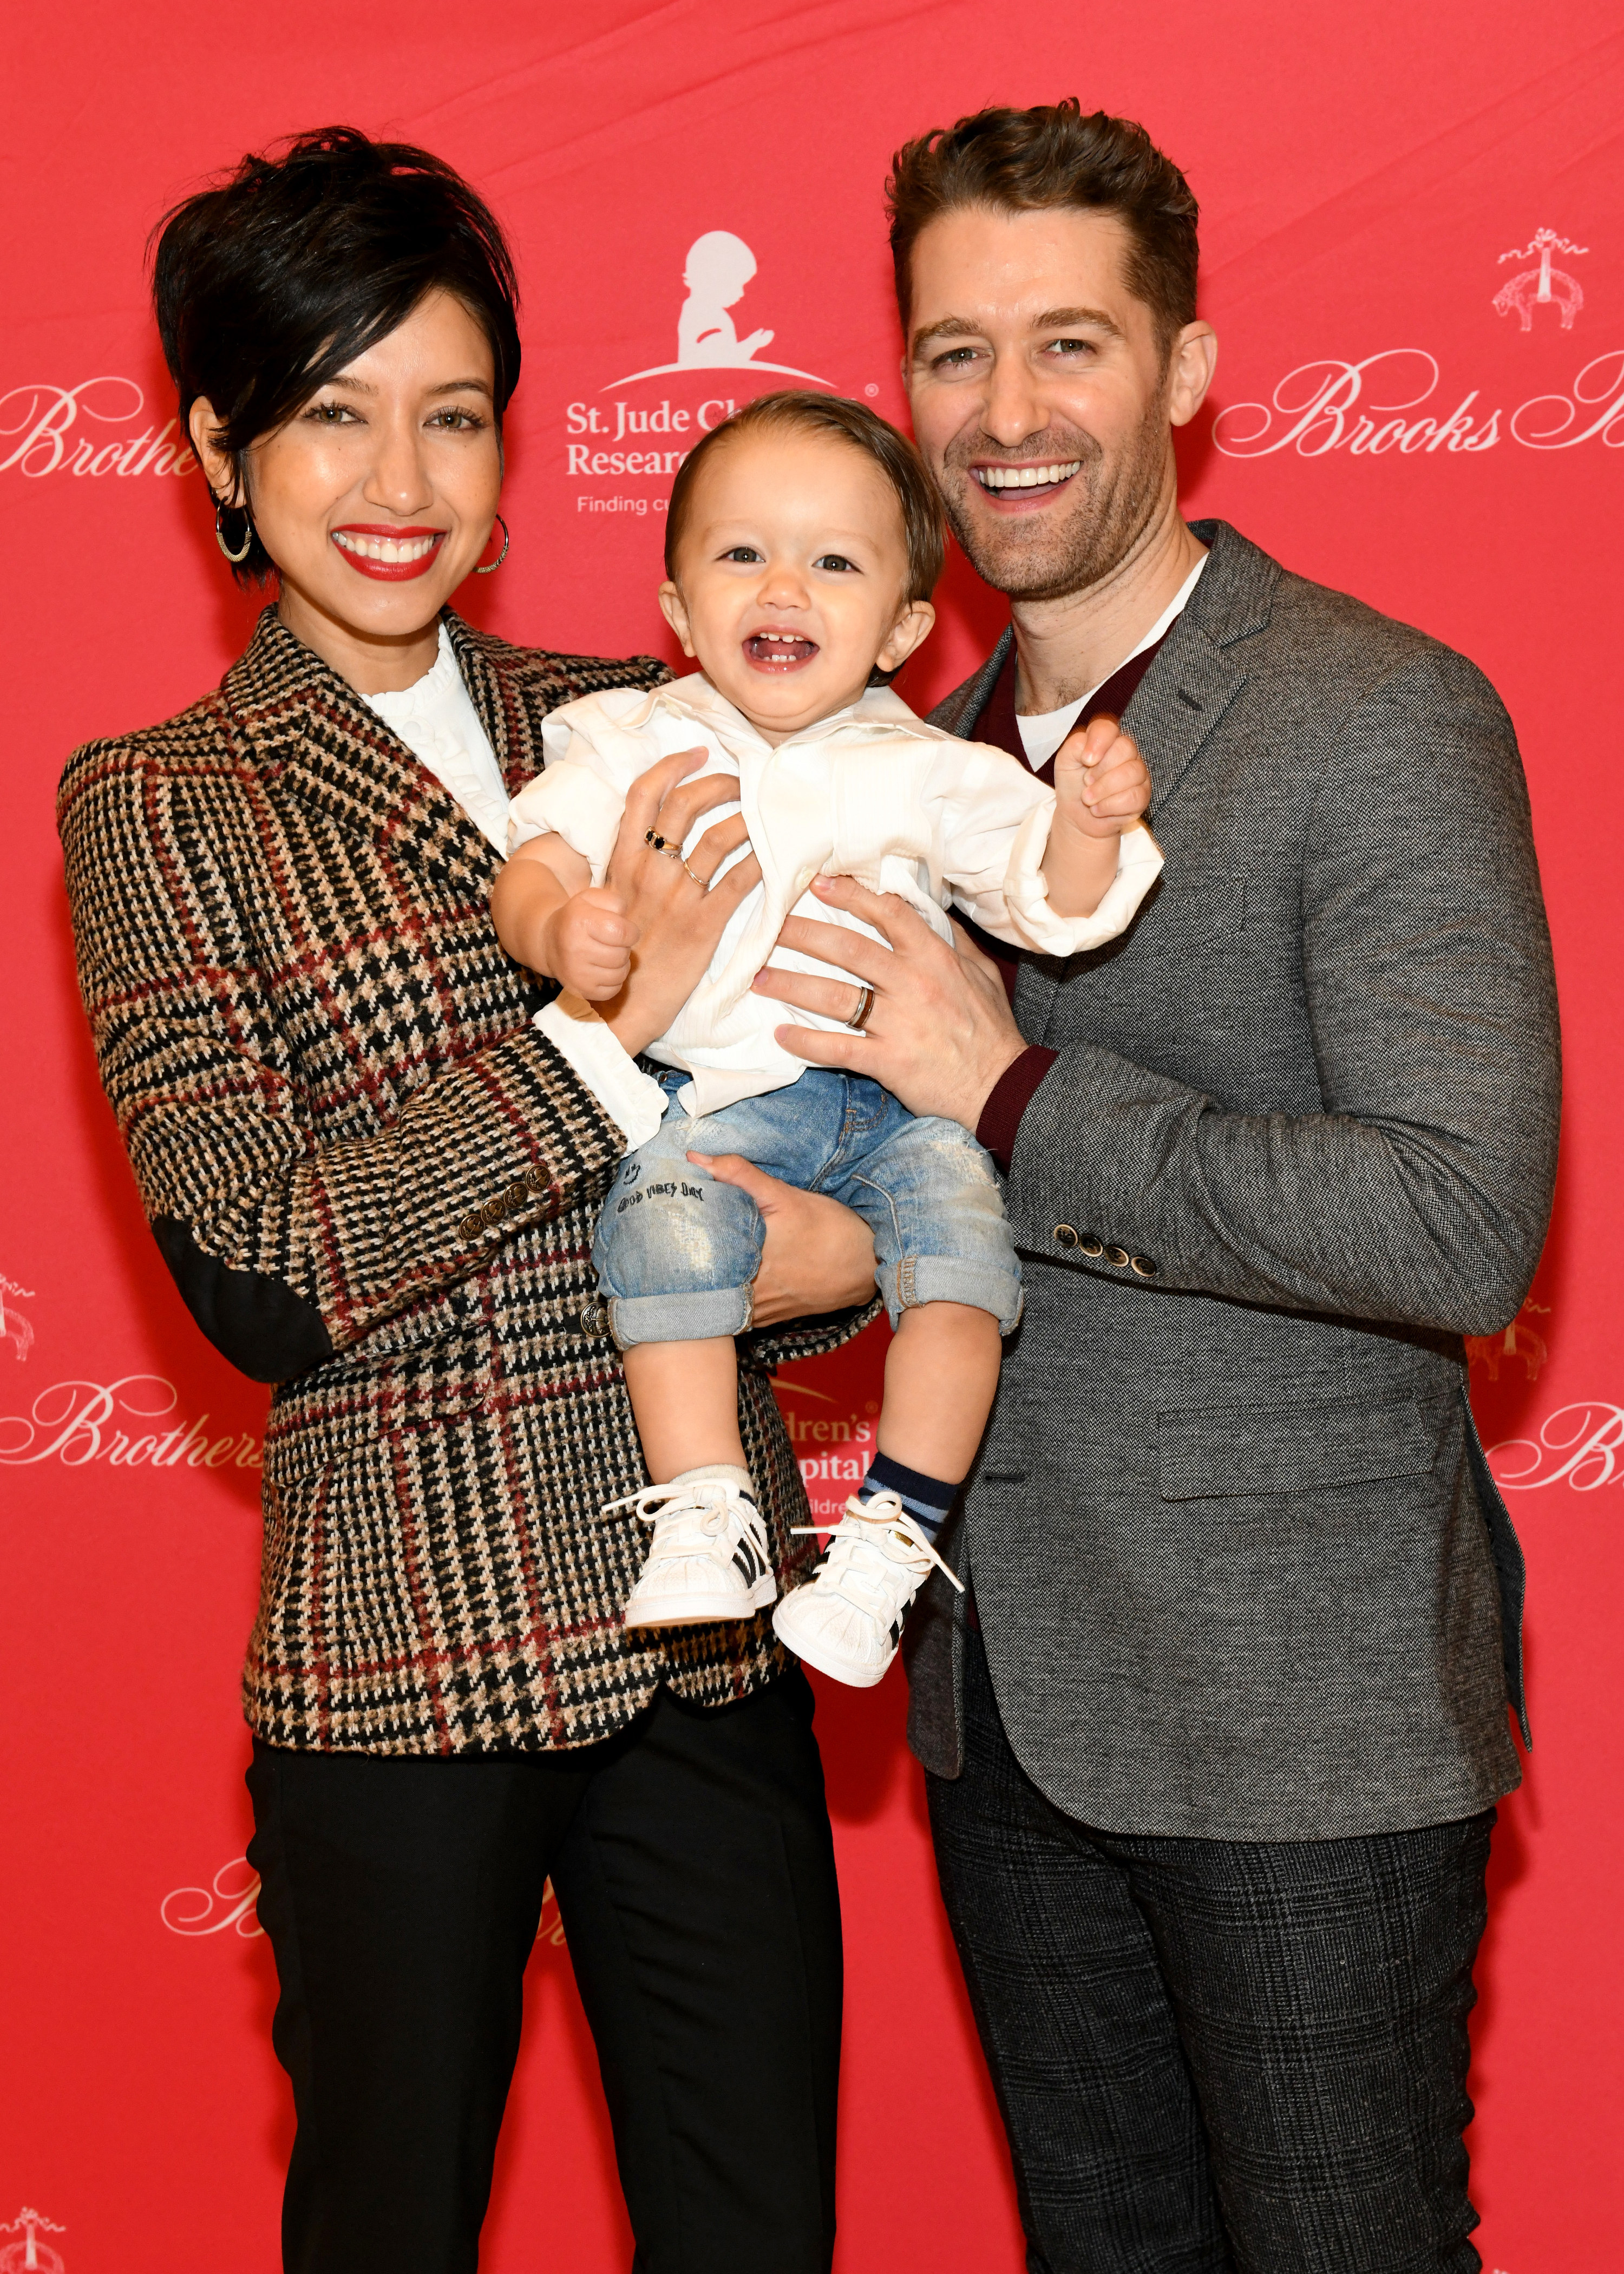 Matthew Morrison and wife Renee Puente with son Revel in 2018